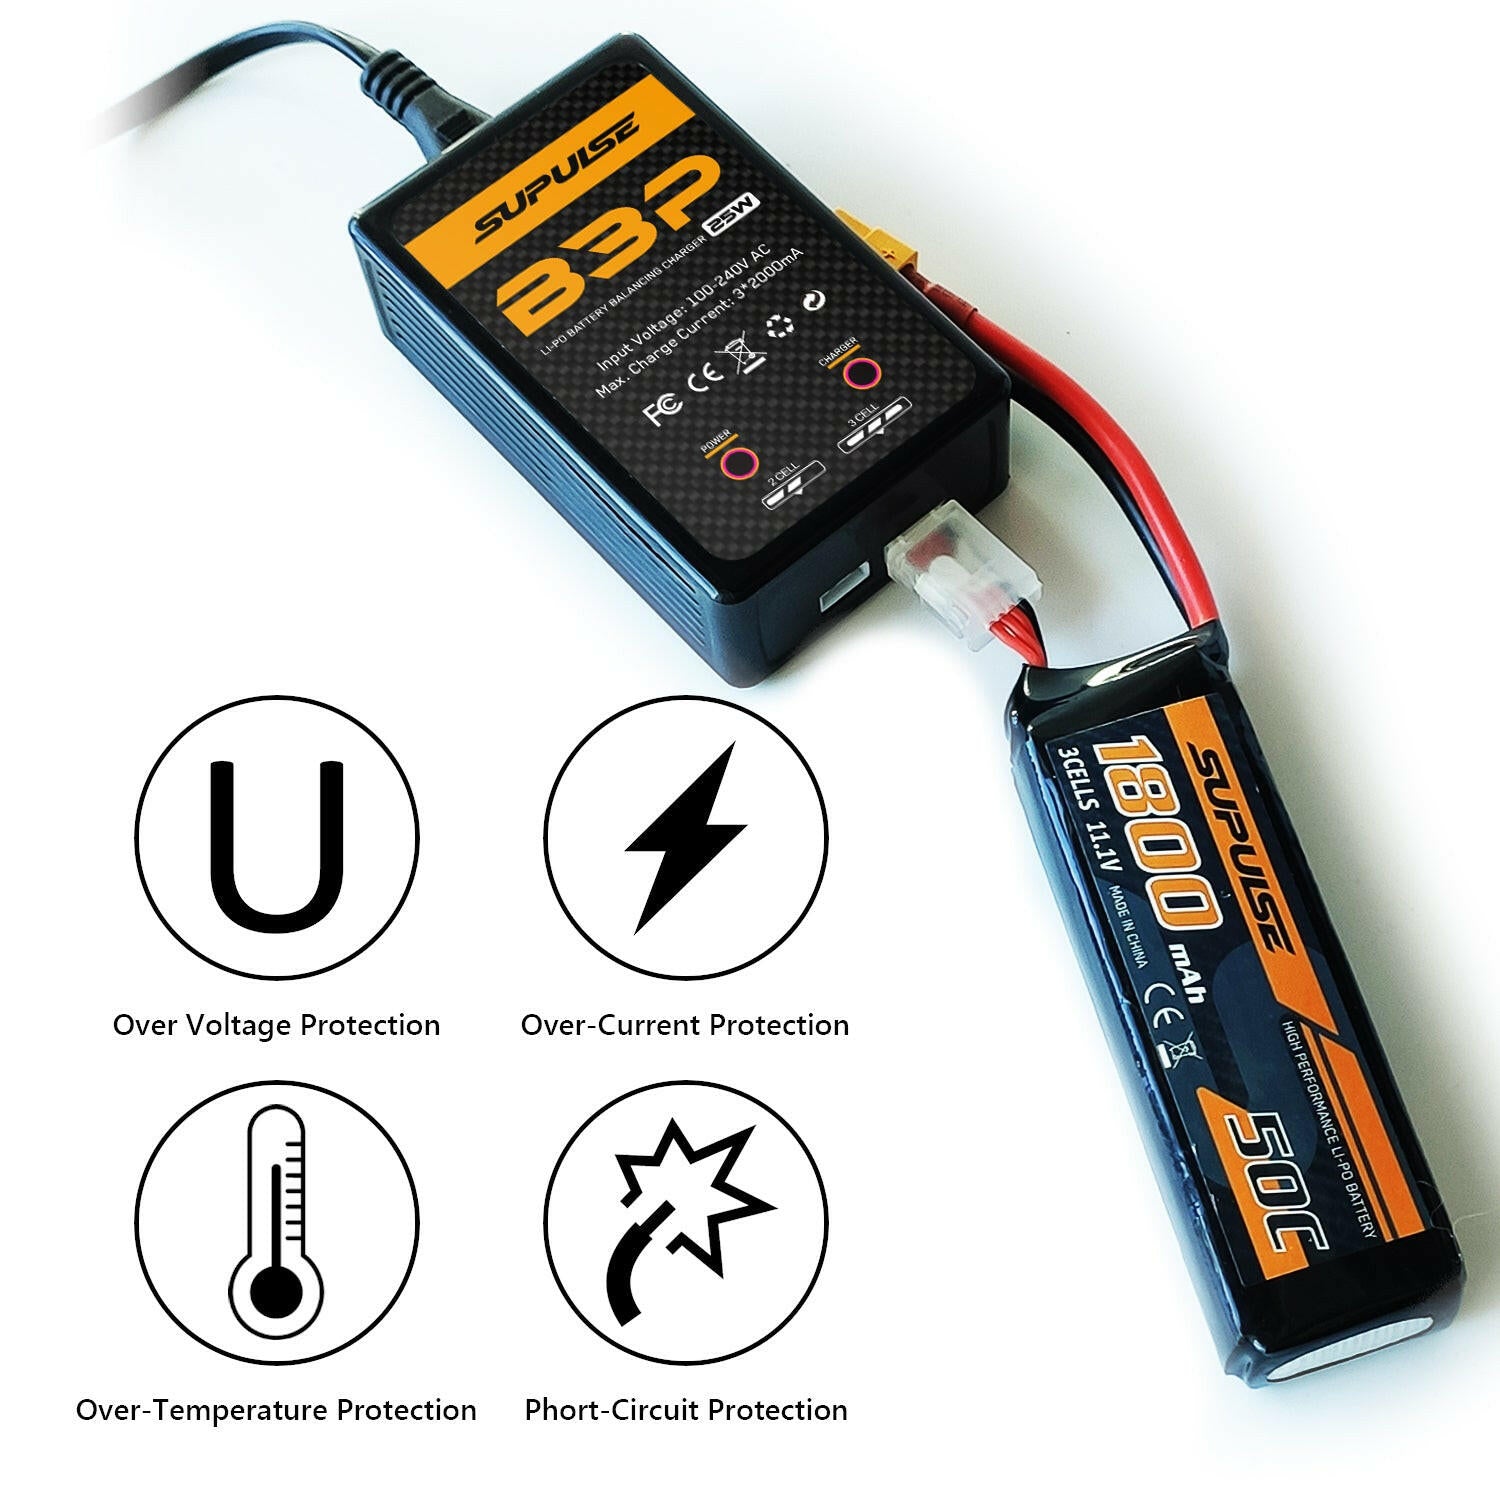 SUPULSE B3P Pro AC LiPo Battery Charger 2S-3S 25W RC Balance Charger - EXHOBBY